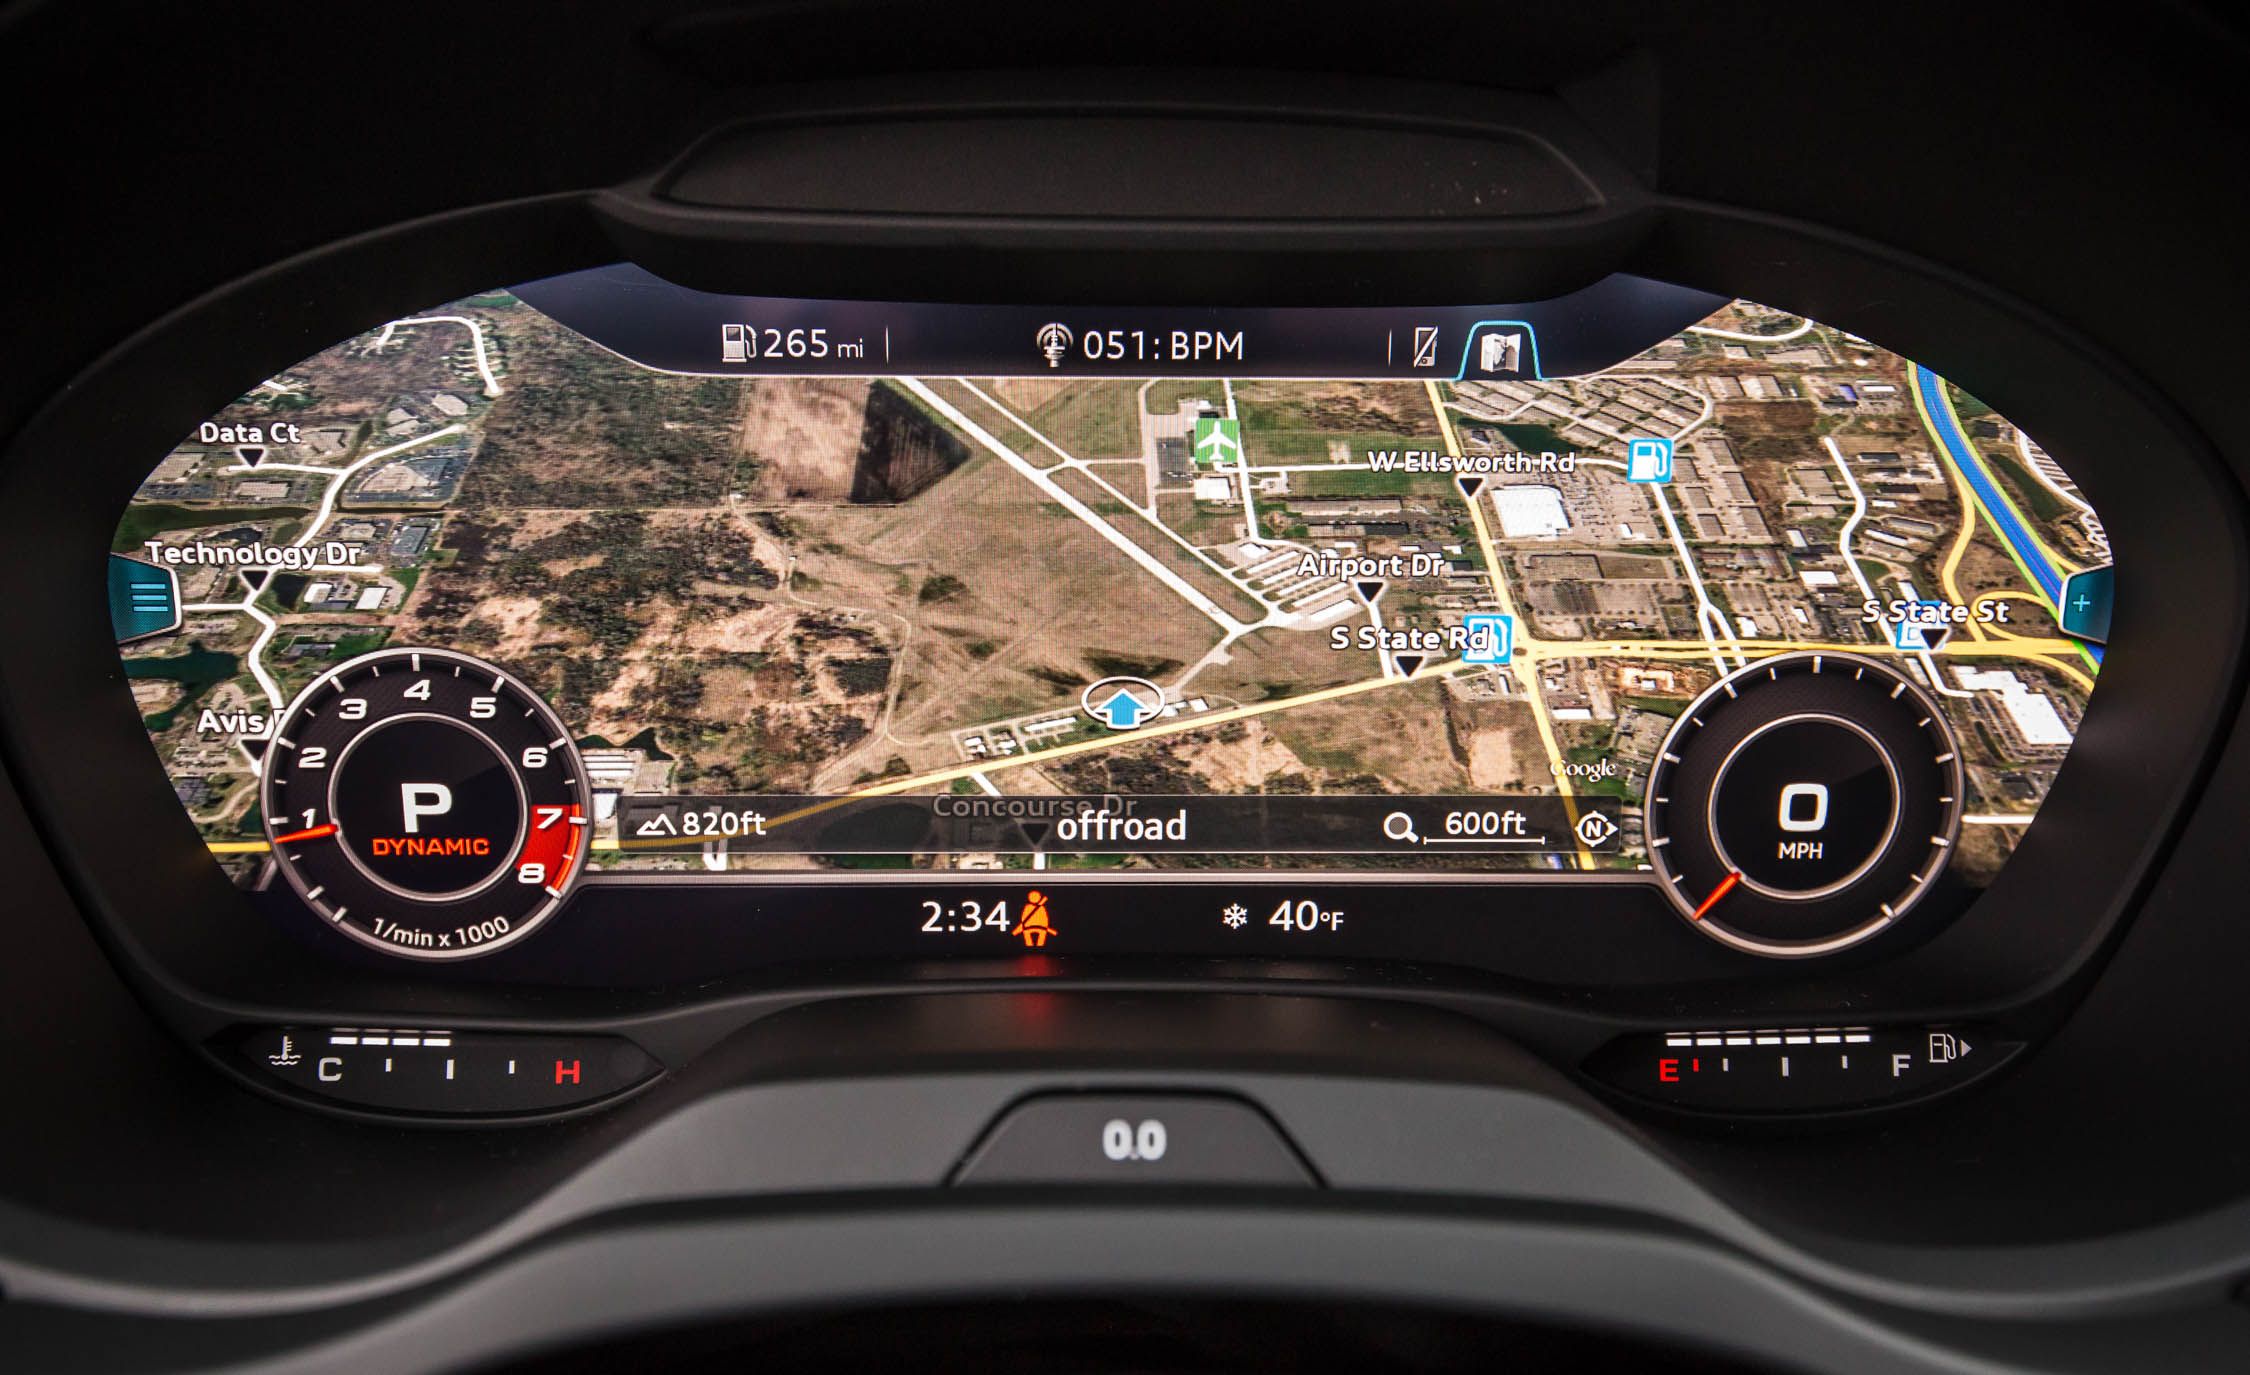 2017 Audi S3 Interior View Gps Maps (View 16 of 50)